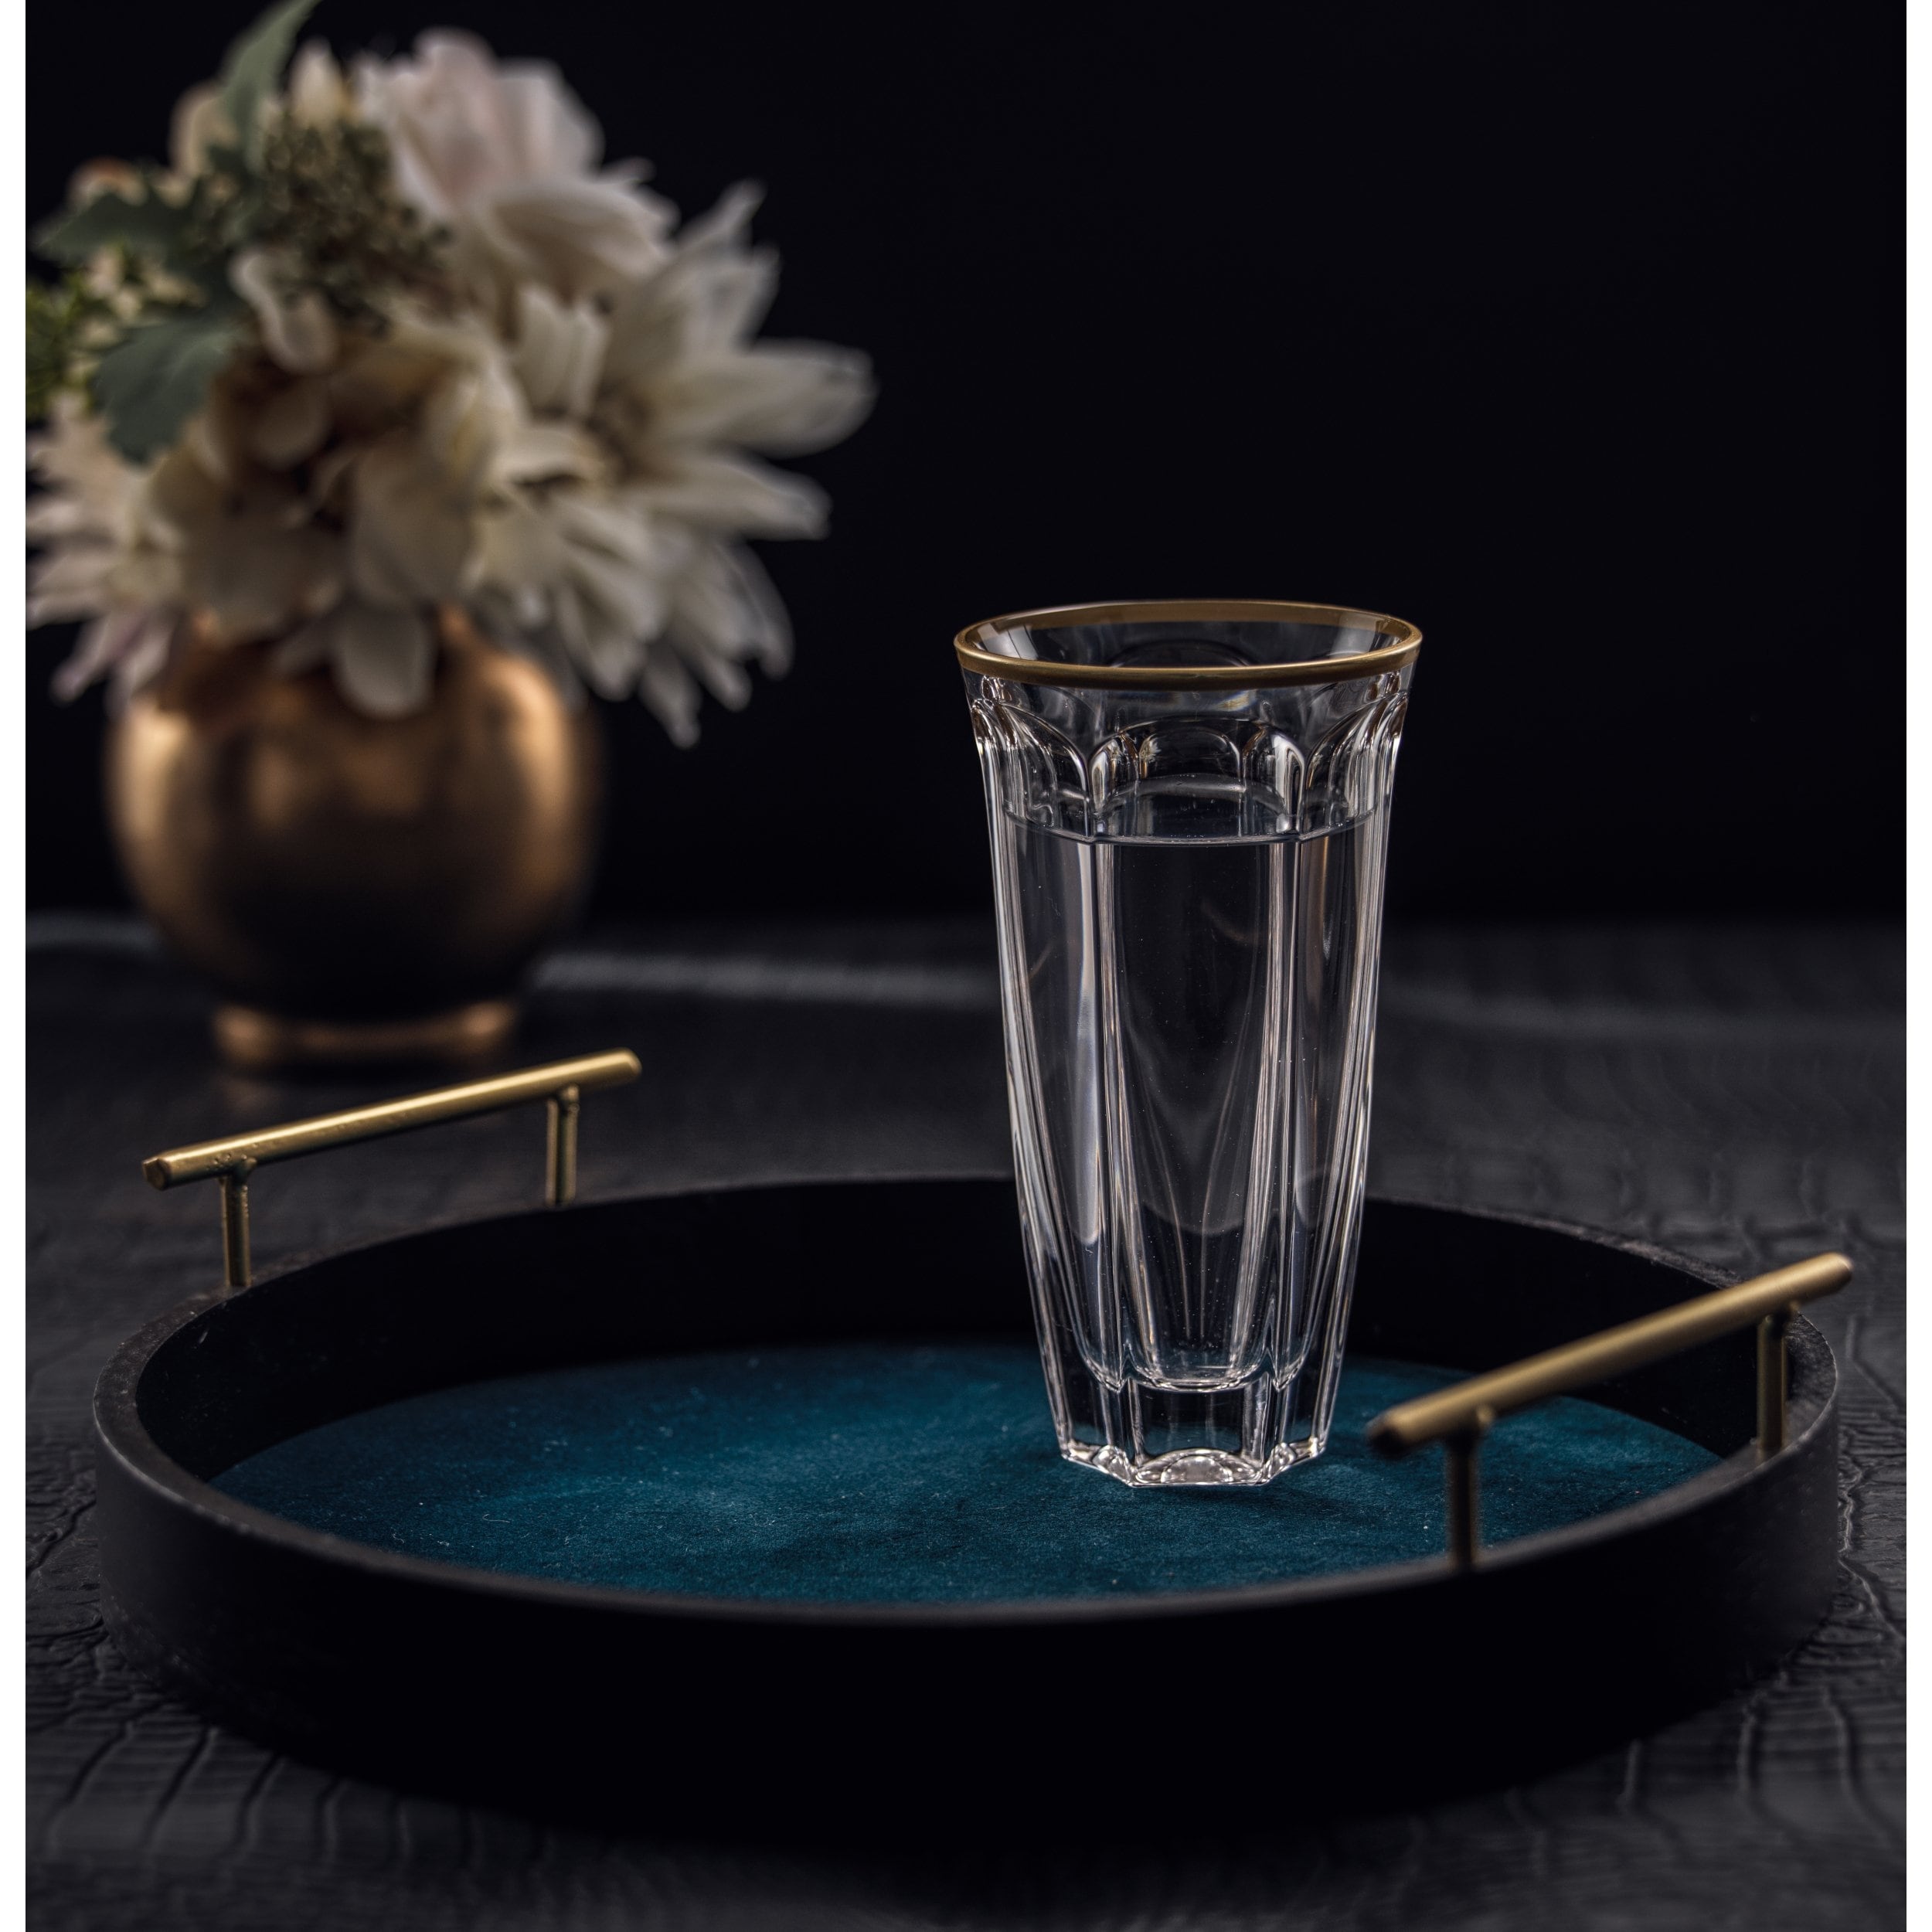 https://ak1.ostkcdn.com/images/products/is/images/direct/8d73f663282b8408d4ec678f21a2d3f0211bb5aa/JoyJolt-Windsor-Crystal-Highball-Glasses---8.7-oz--Set-of-2.jpg